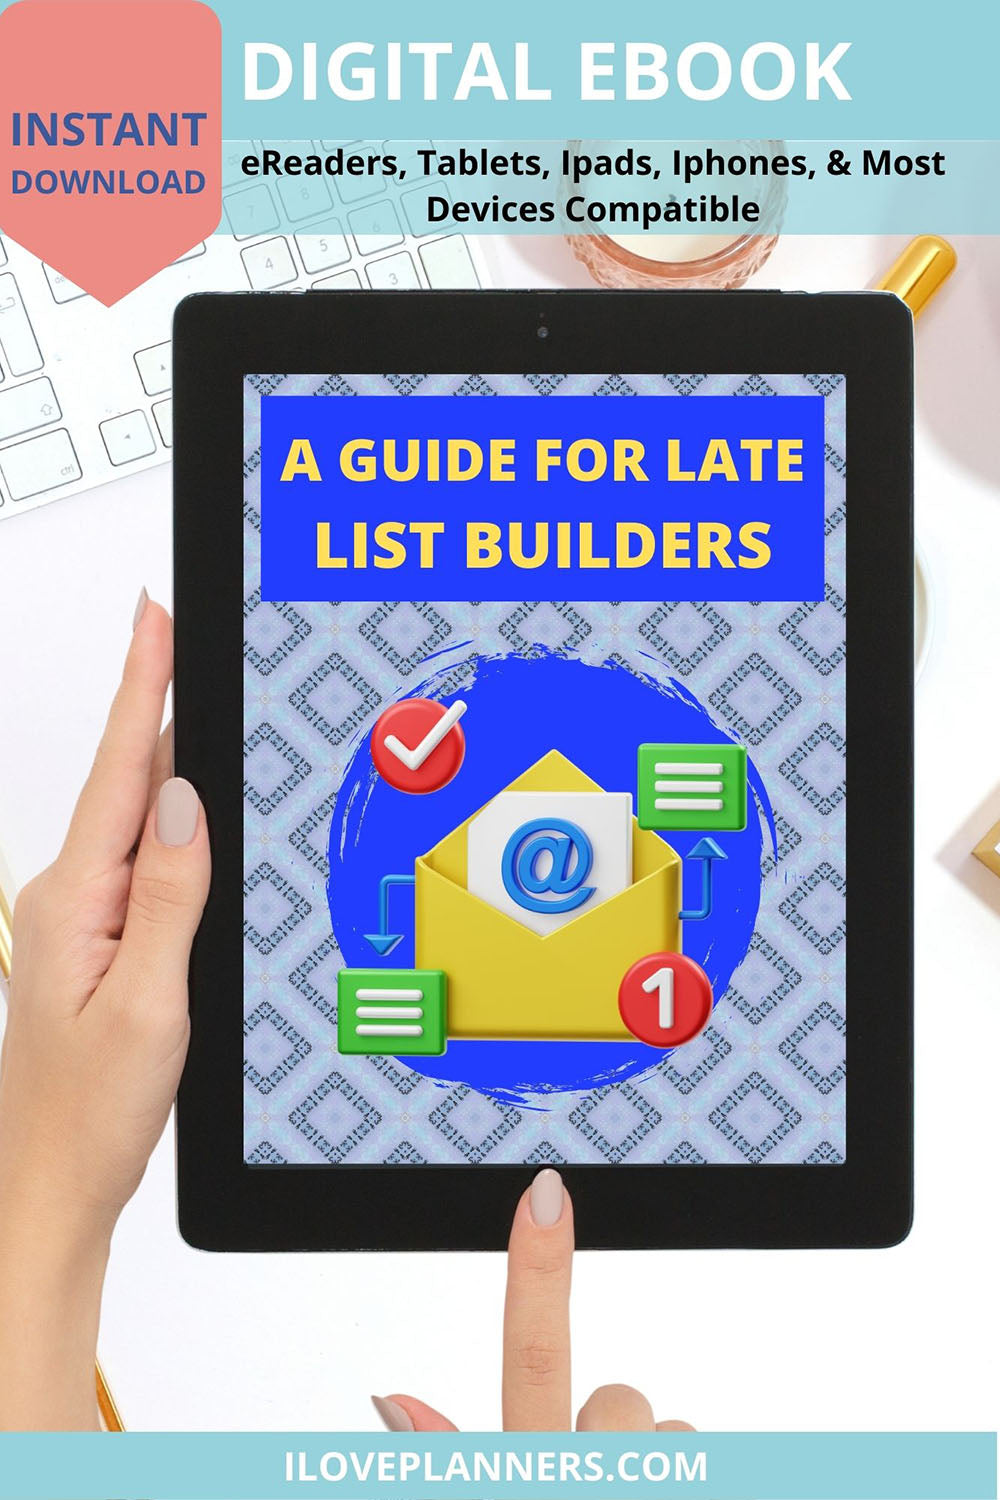 EBOOK- A Guide To Late List Building, Instant Download, Digital ebook, R39